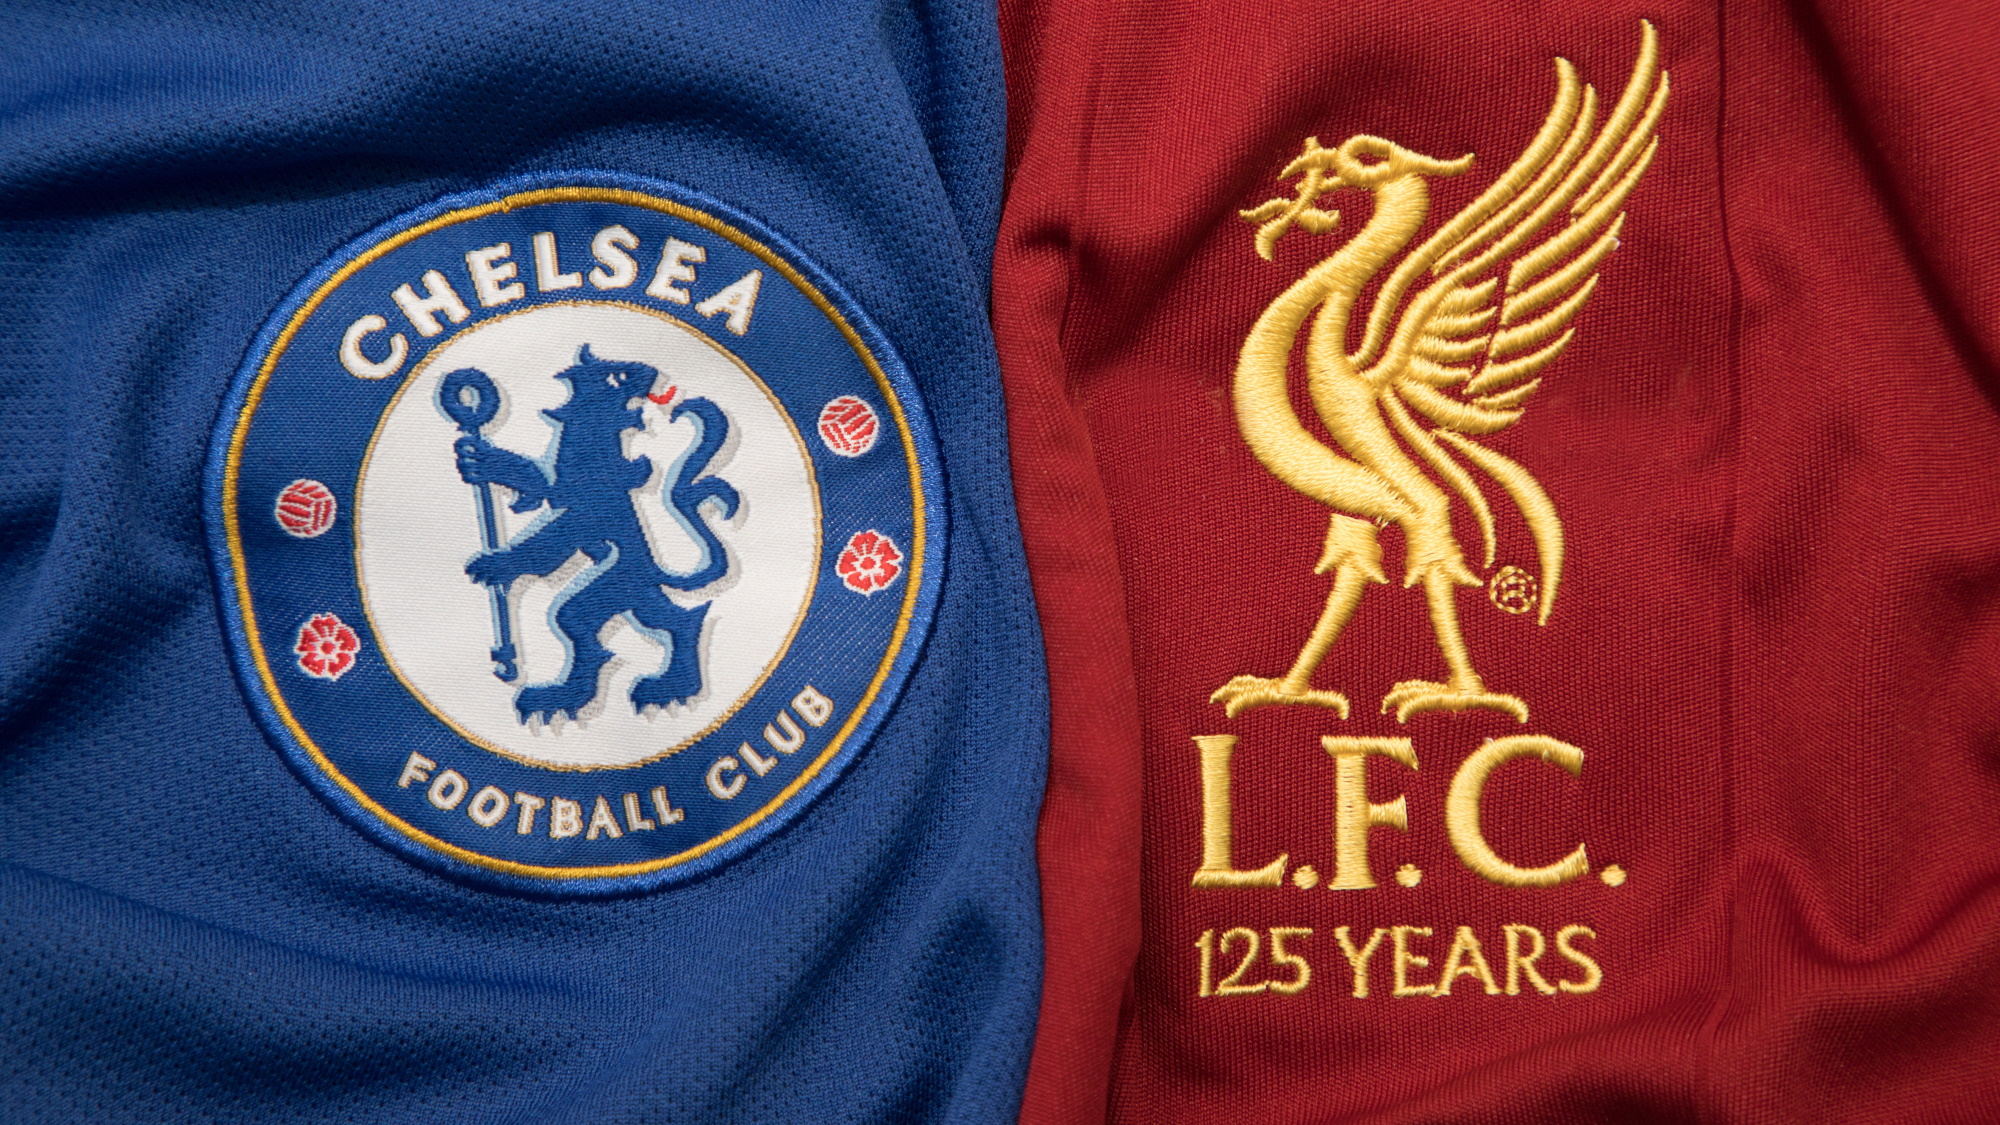 Chelsea vs Liverpool live stream how to watch Carabao Cup Final 2022 online now from anywhere TechRadar